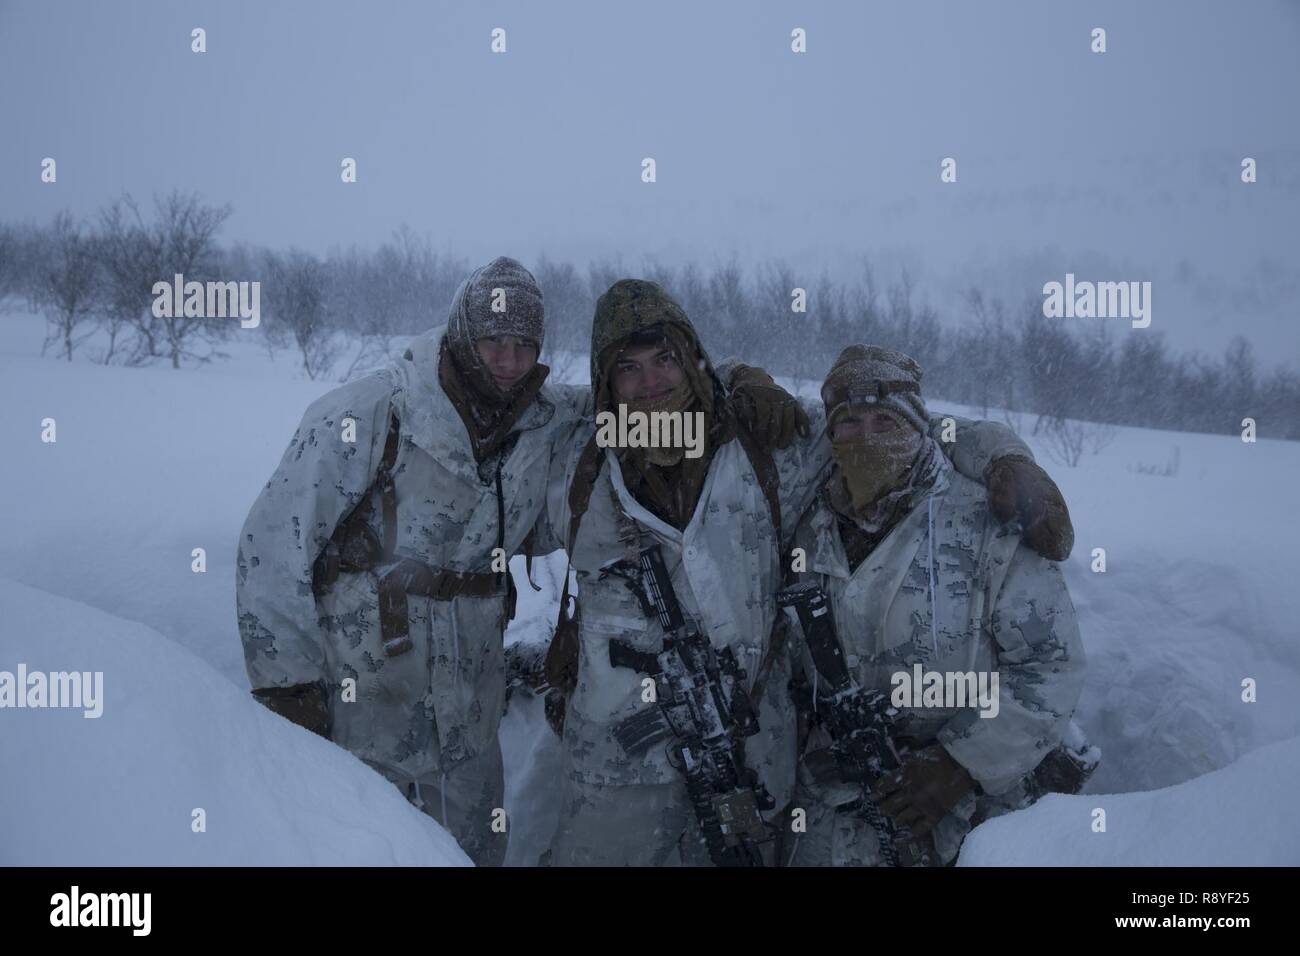 U.S. Marines Cpl. Conway Hughes, left, Cpl. Mason Siegel, middle, and Lance Cpl. Charles Pate, right, prepare to stand watch during a blizzard March 11, 2017, inside the Arctic Circle of Norway. Marine Rotational Force Europe 17.1 (MRF-E) participated in Exercise Joint Viking. No nation can confront today’s challenges alone, a principle embraced by U.S., U.K., Norwegian, and Dutch forces who participated in the exercise. Hughes, Siegel and Pate are riflemen with 1st Platoon, MRF-E. Stock Photo